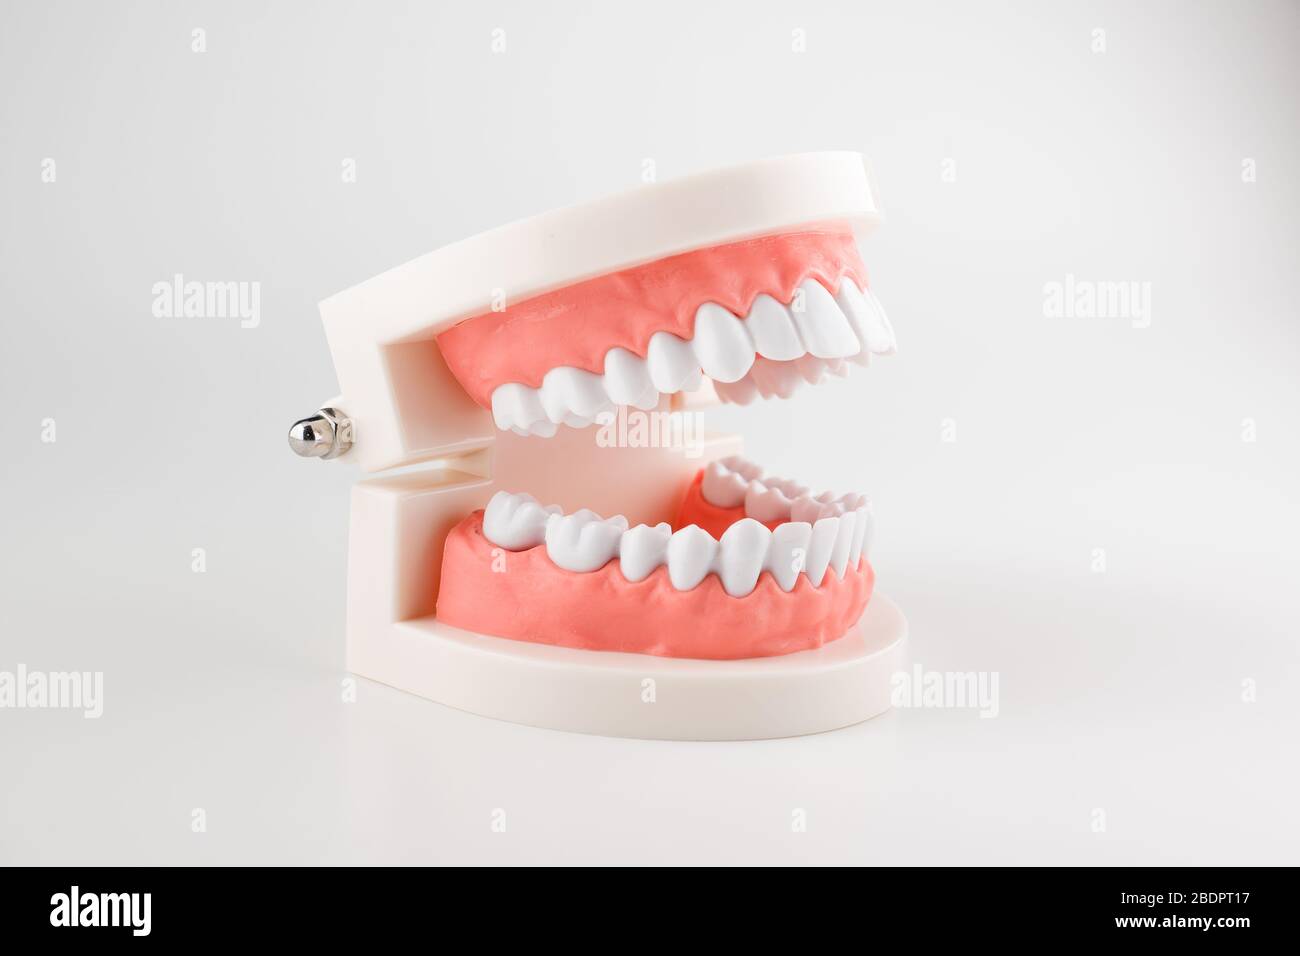 acrylic human jaw model for studying oral hygiene Stock Photo